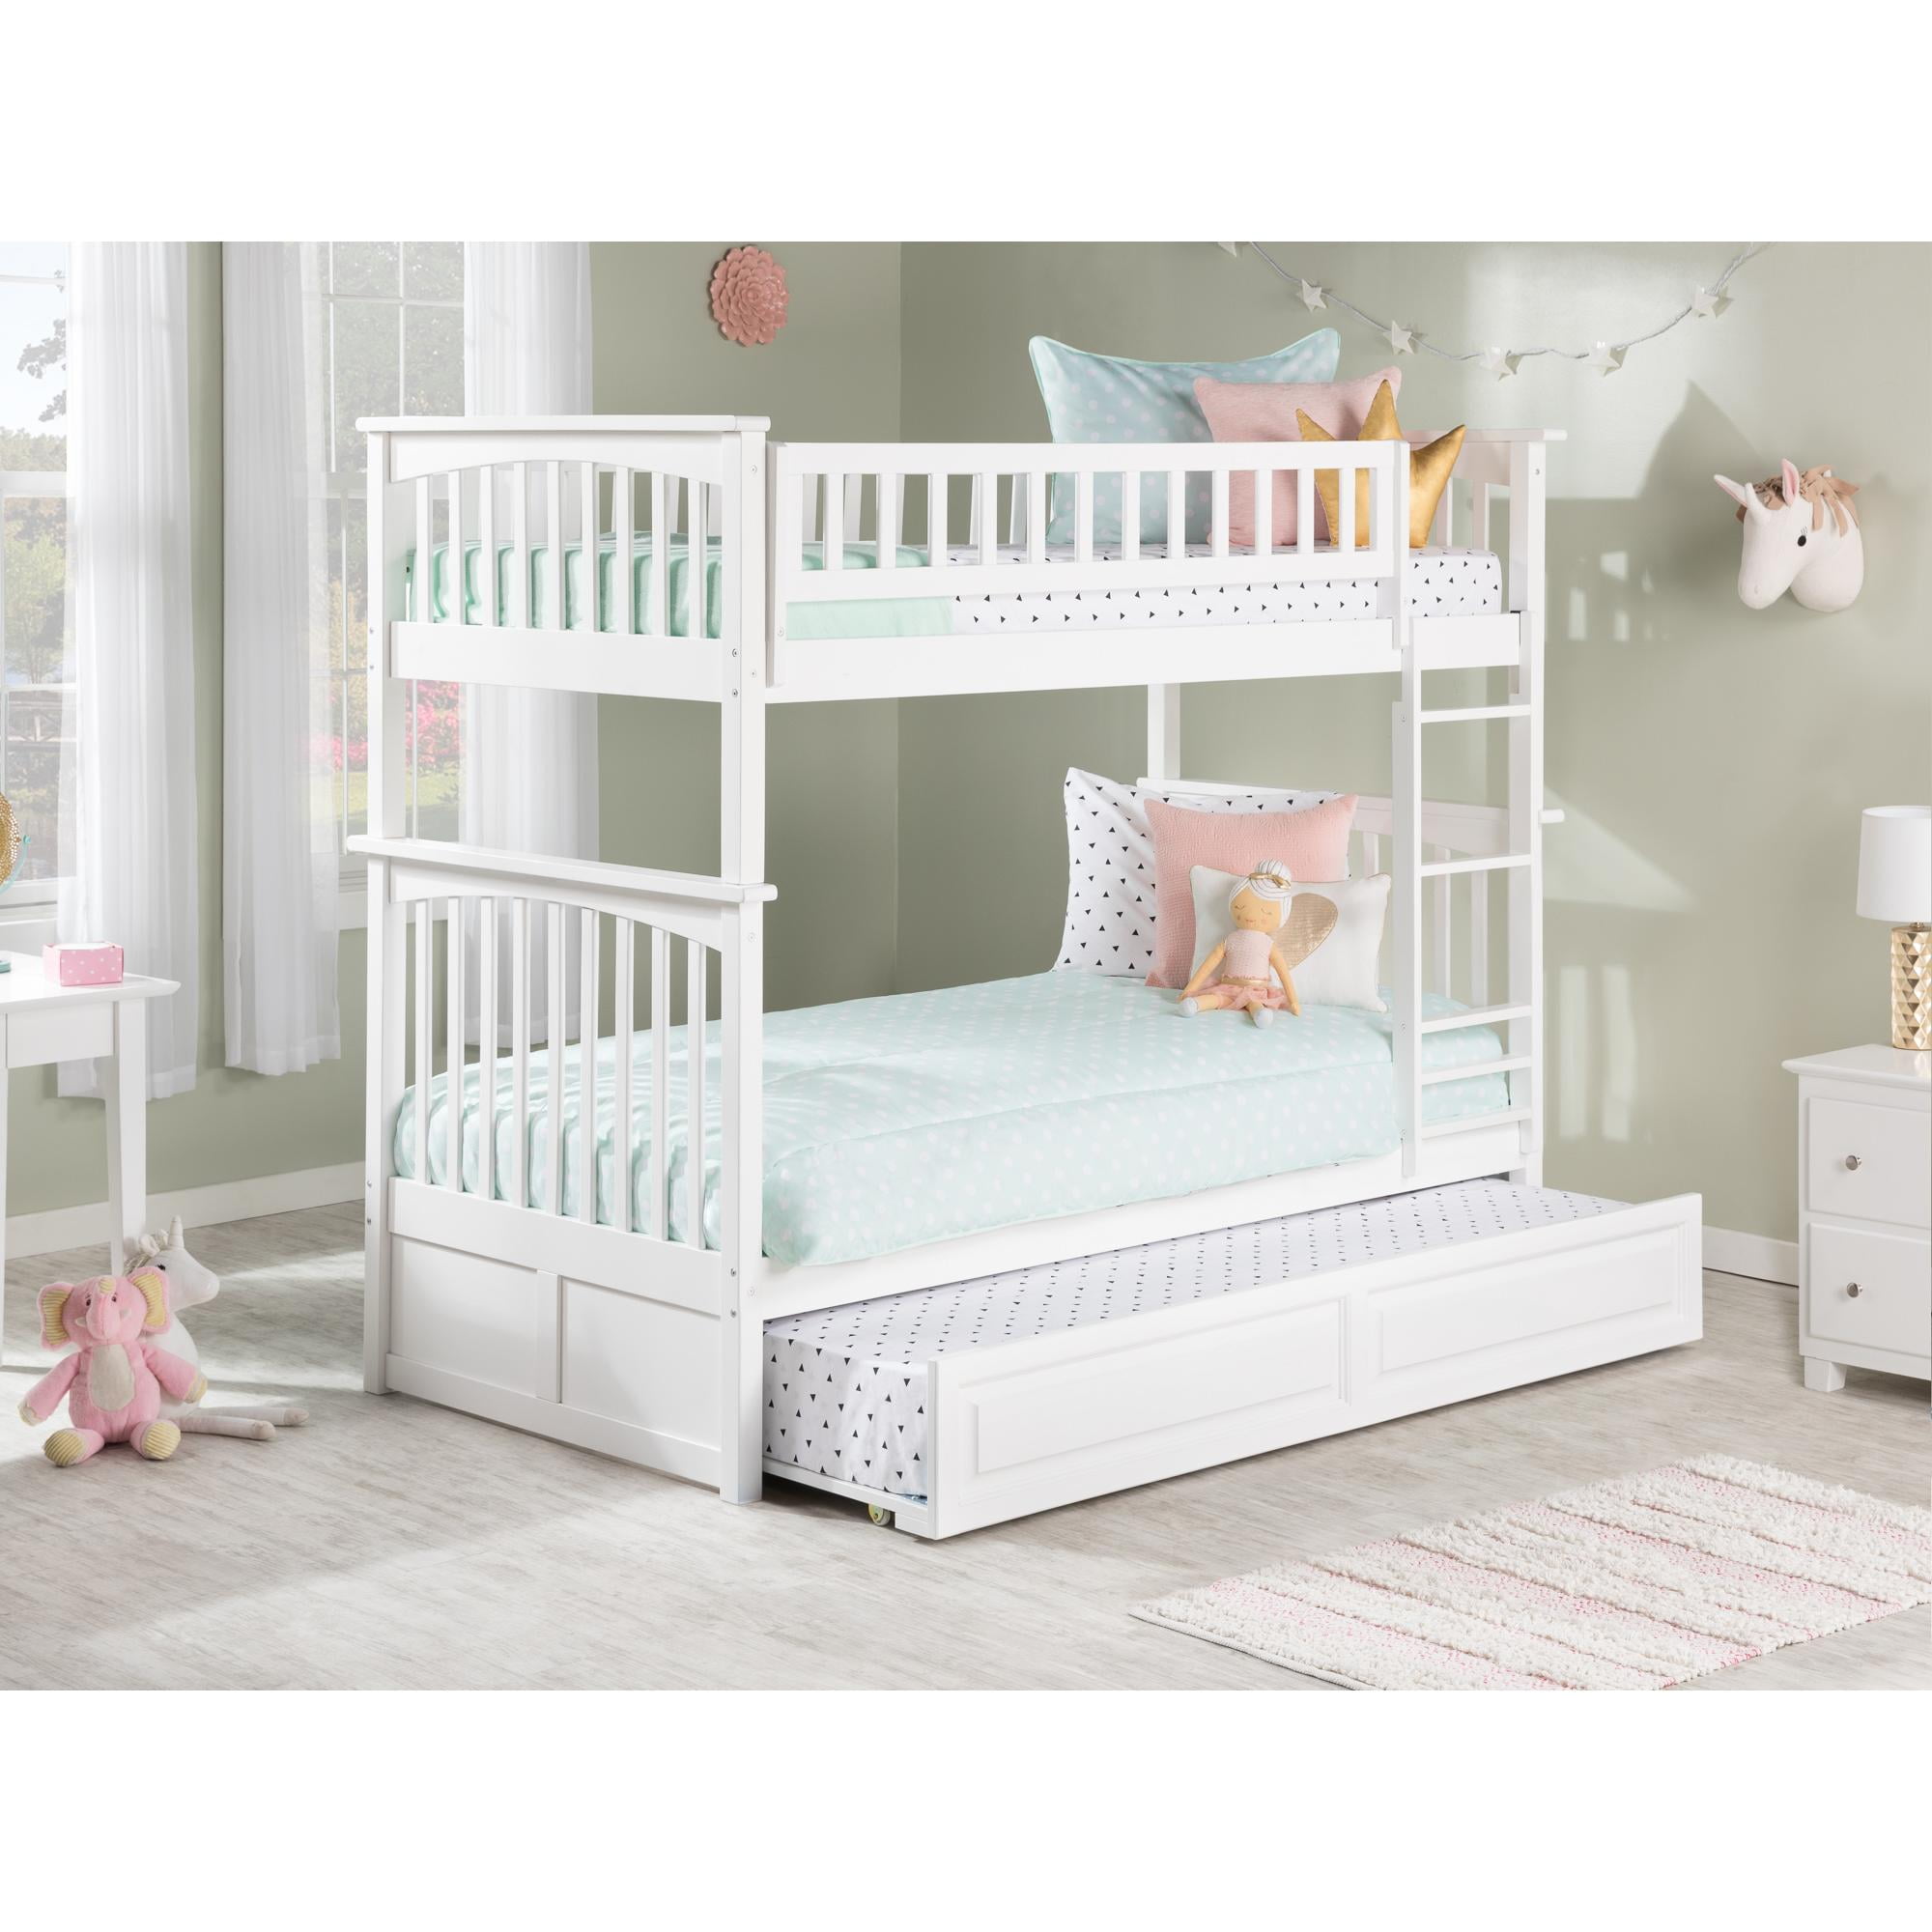 Ab55132 Columbia Bunkbed With Raised Panel Trundle Bed, Twin Over Twin Size - White